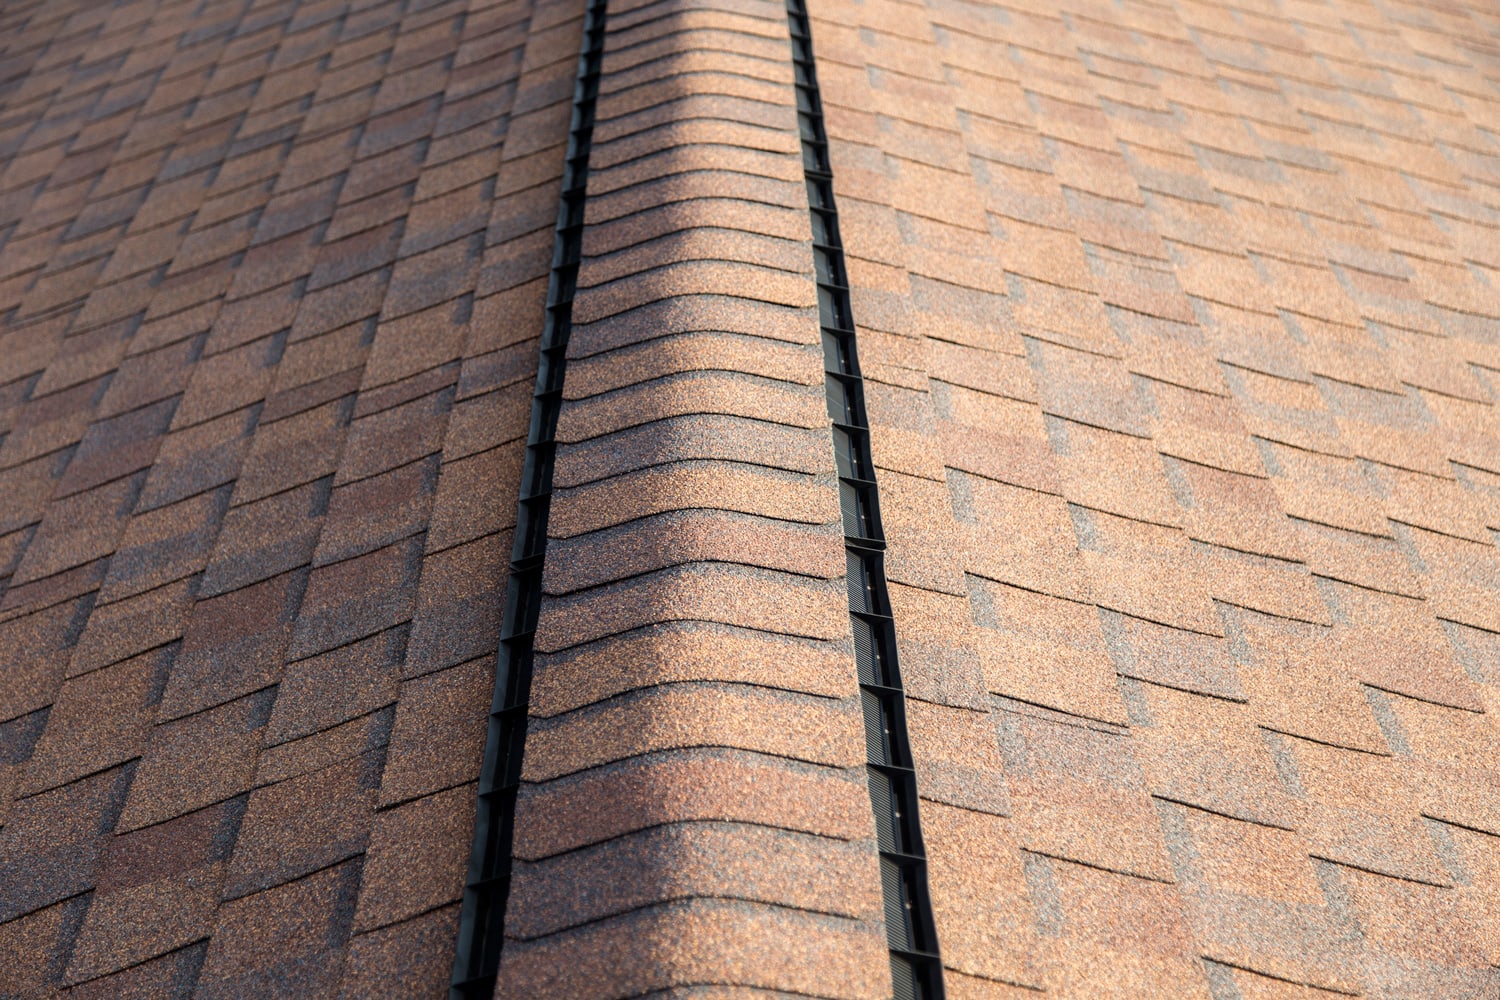 Shingles on a residential house.